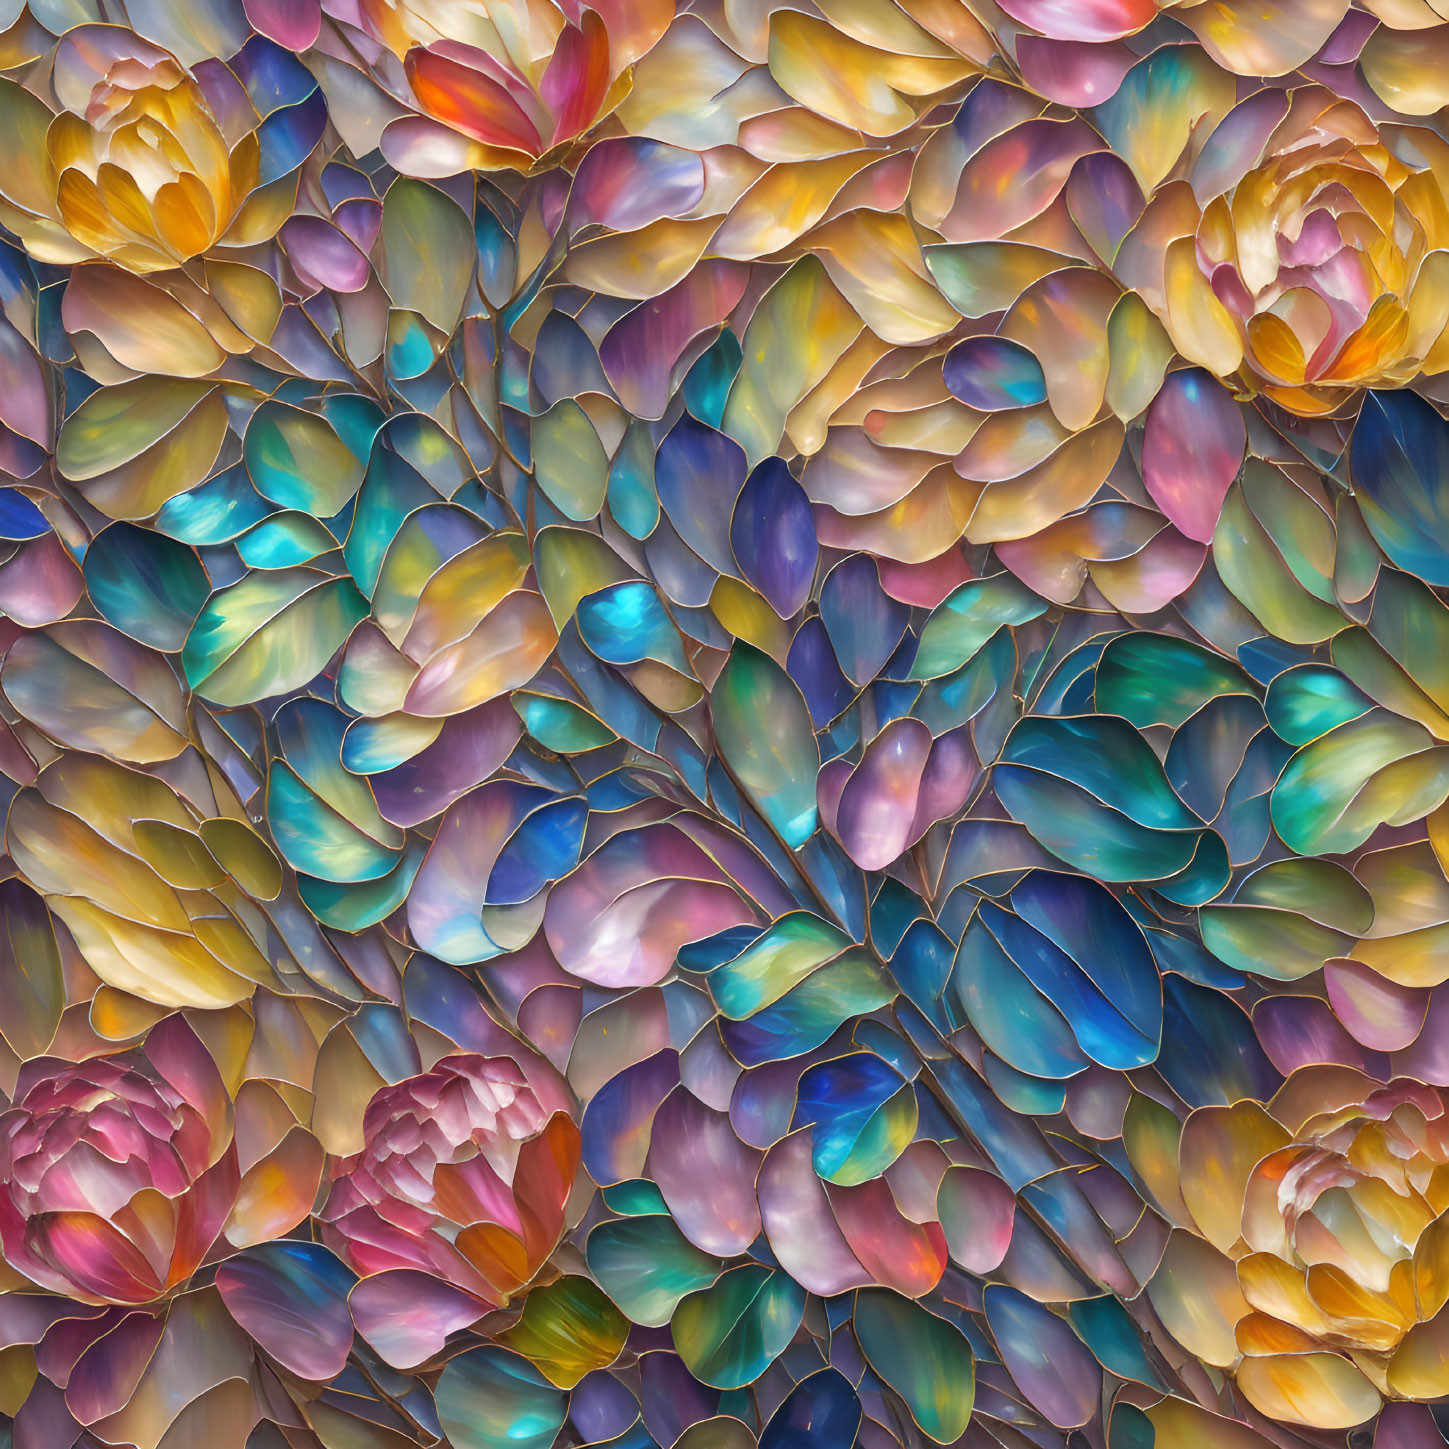 Multicolored Floral Metal Wall Art with Overlapping Petals